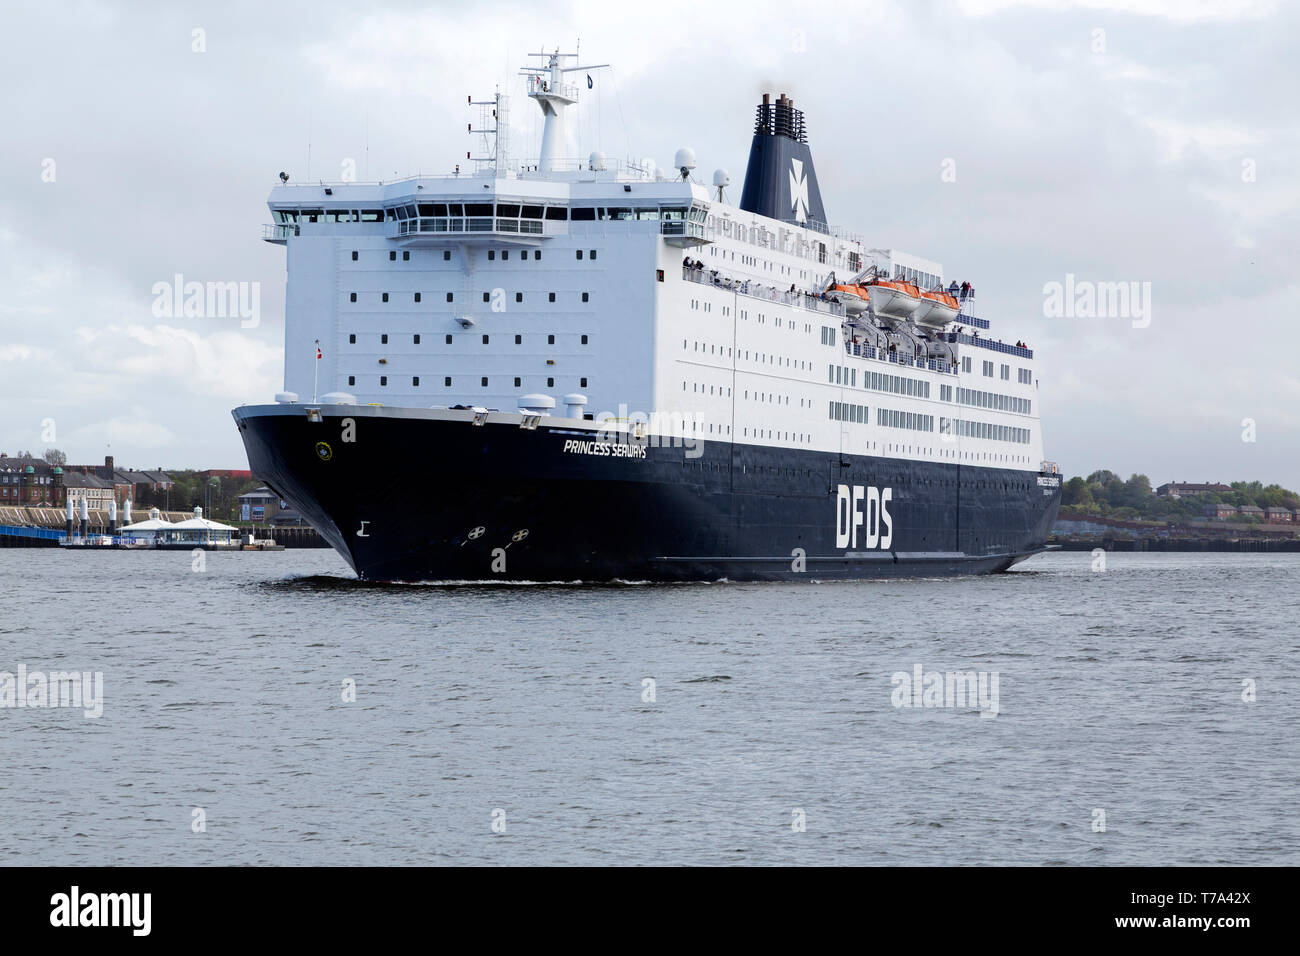 The DFDS ferry, Princess Seaways on the River Tyne after sailing from the Port of Tyne in north-east England. Stock Photo